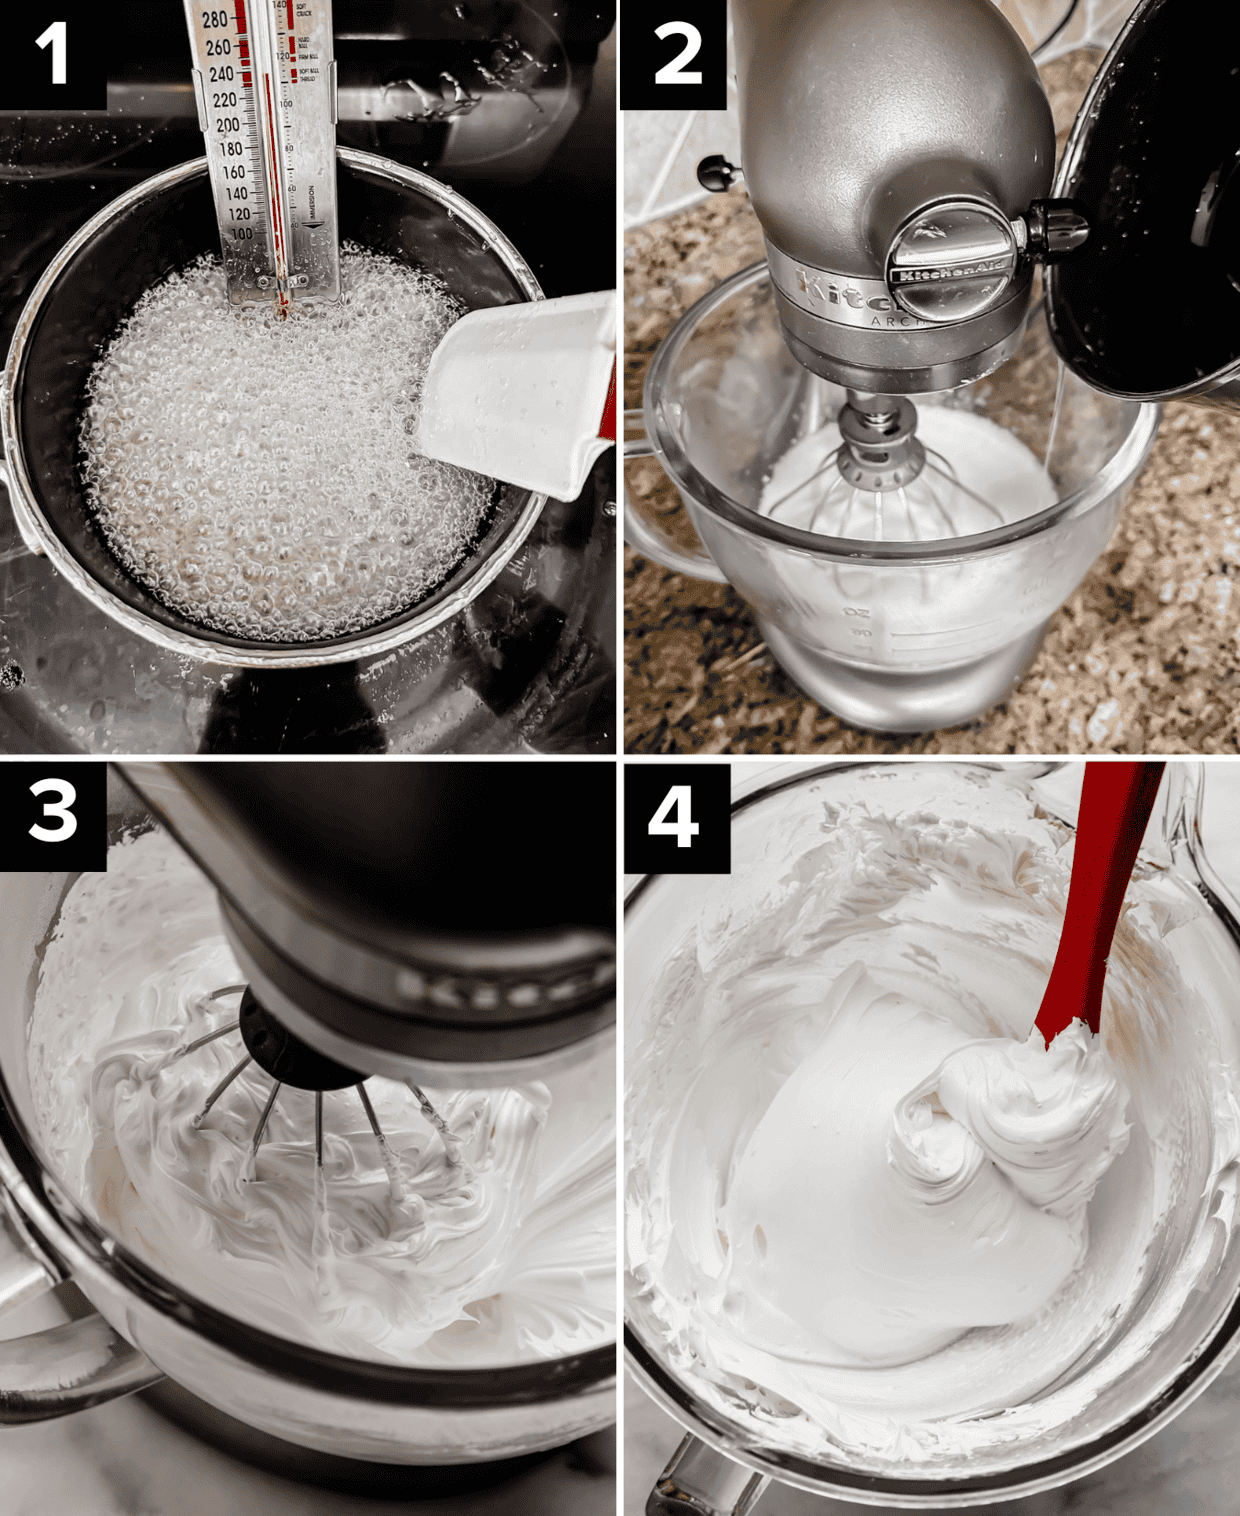 Four photos showing the process of how to make Homemade Marshmallow Cream (creme): top left is sugar, water, corn syrup and salt boiling, top right is egg whites whipped in a bowl, bottom left and right photos showing Homemade Marshmallow Cream in a glass bowl.